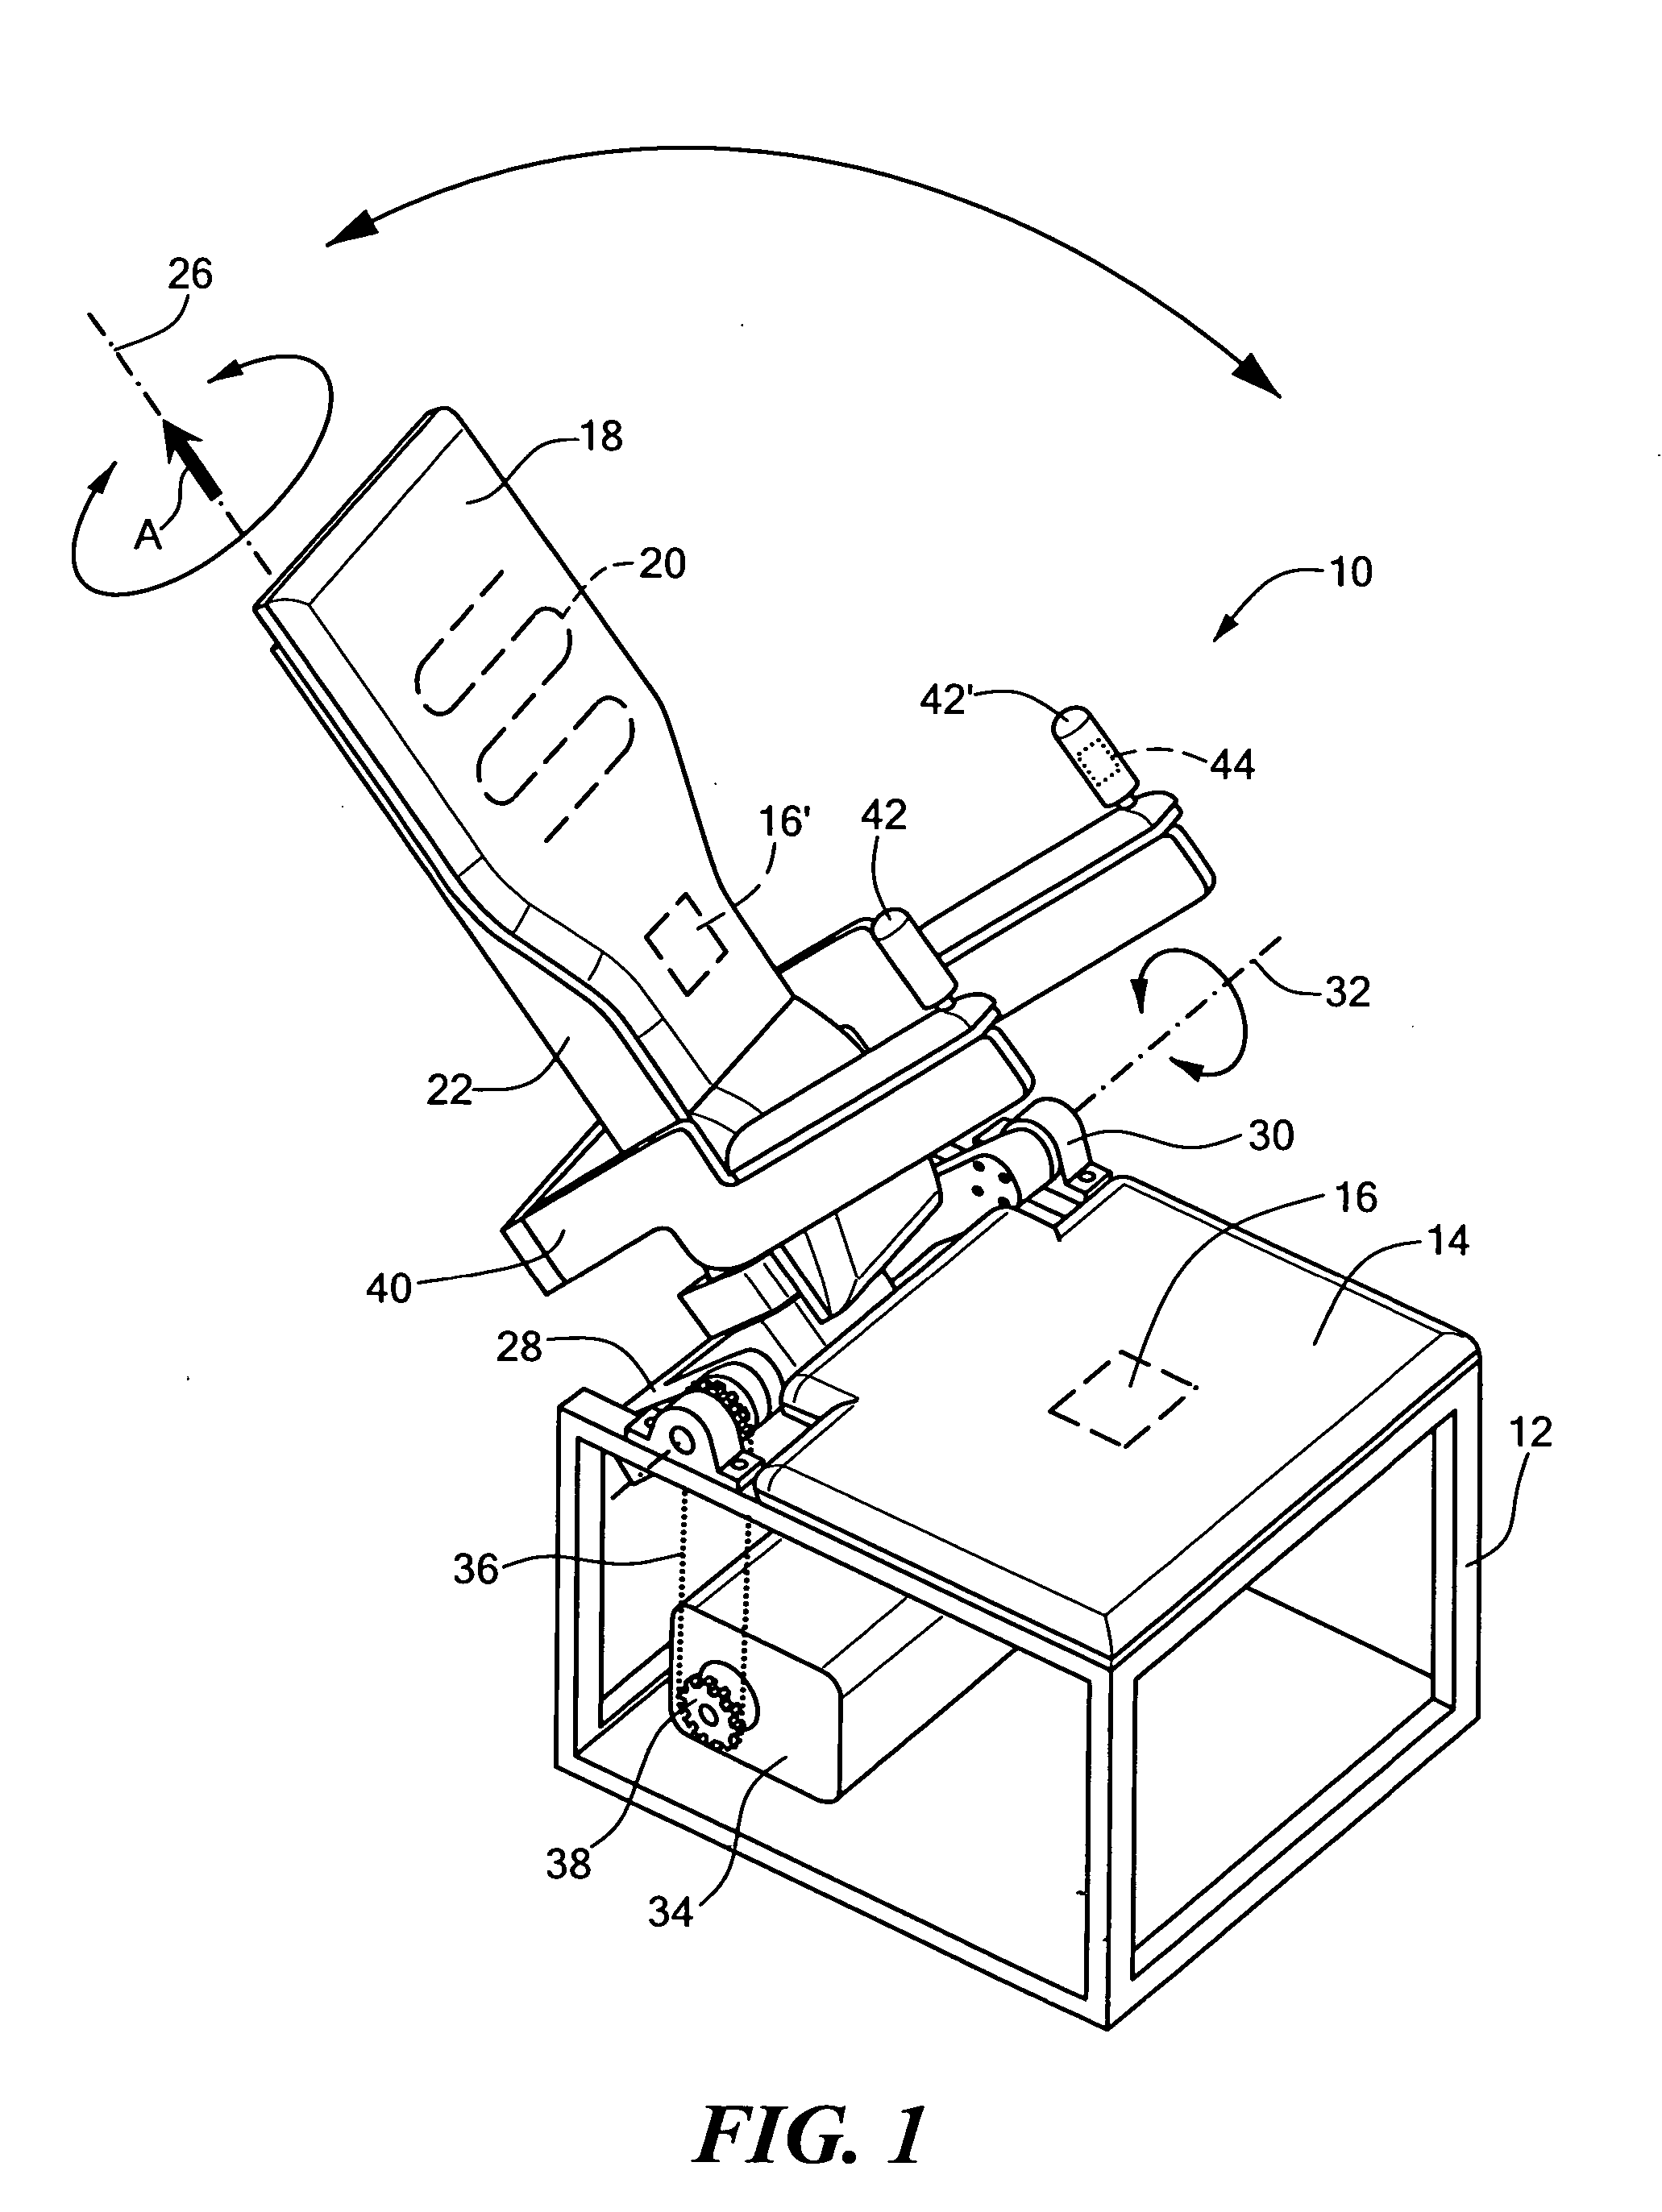 Passive motion body articulating apparatus and method